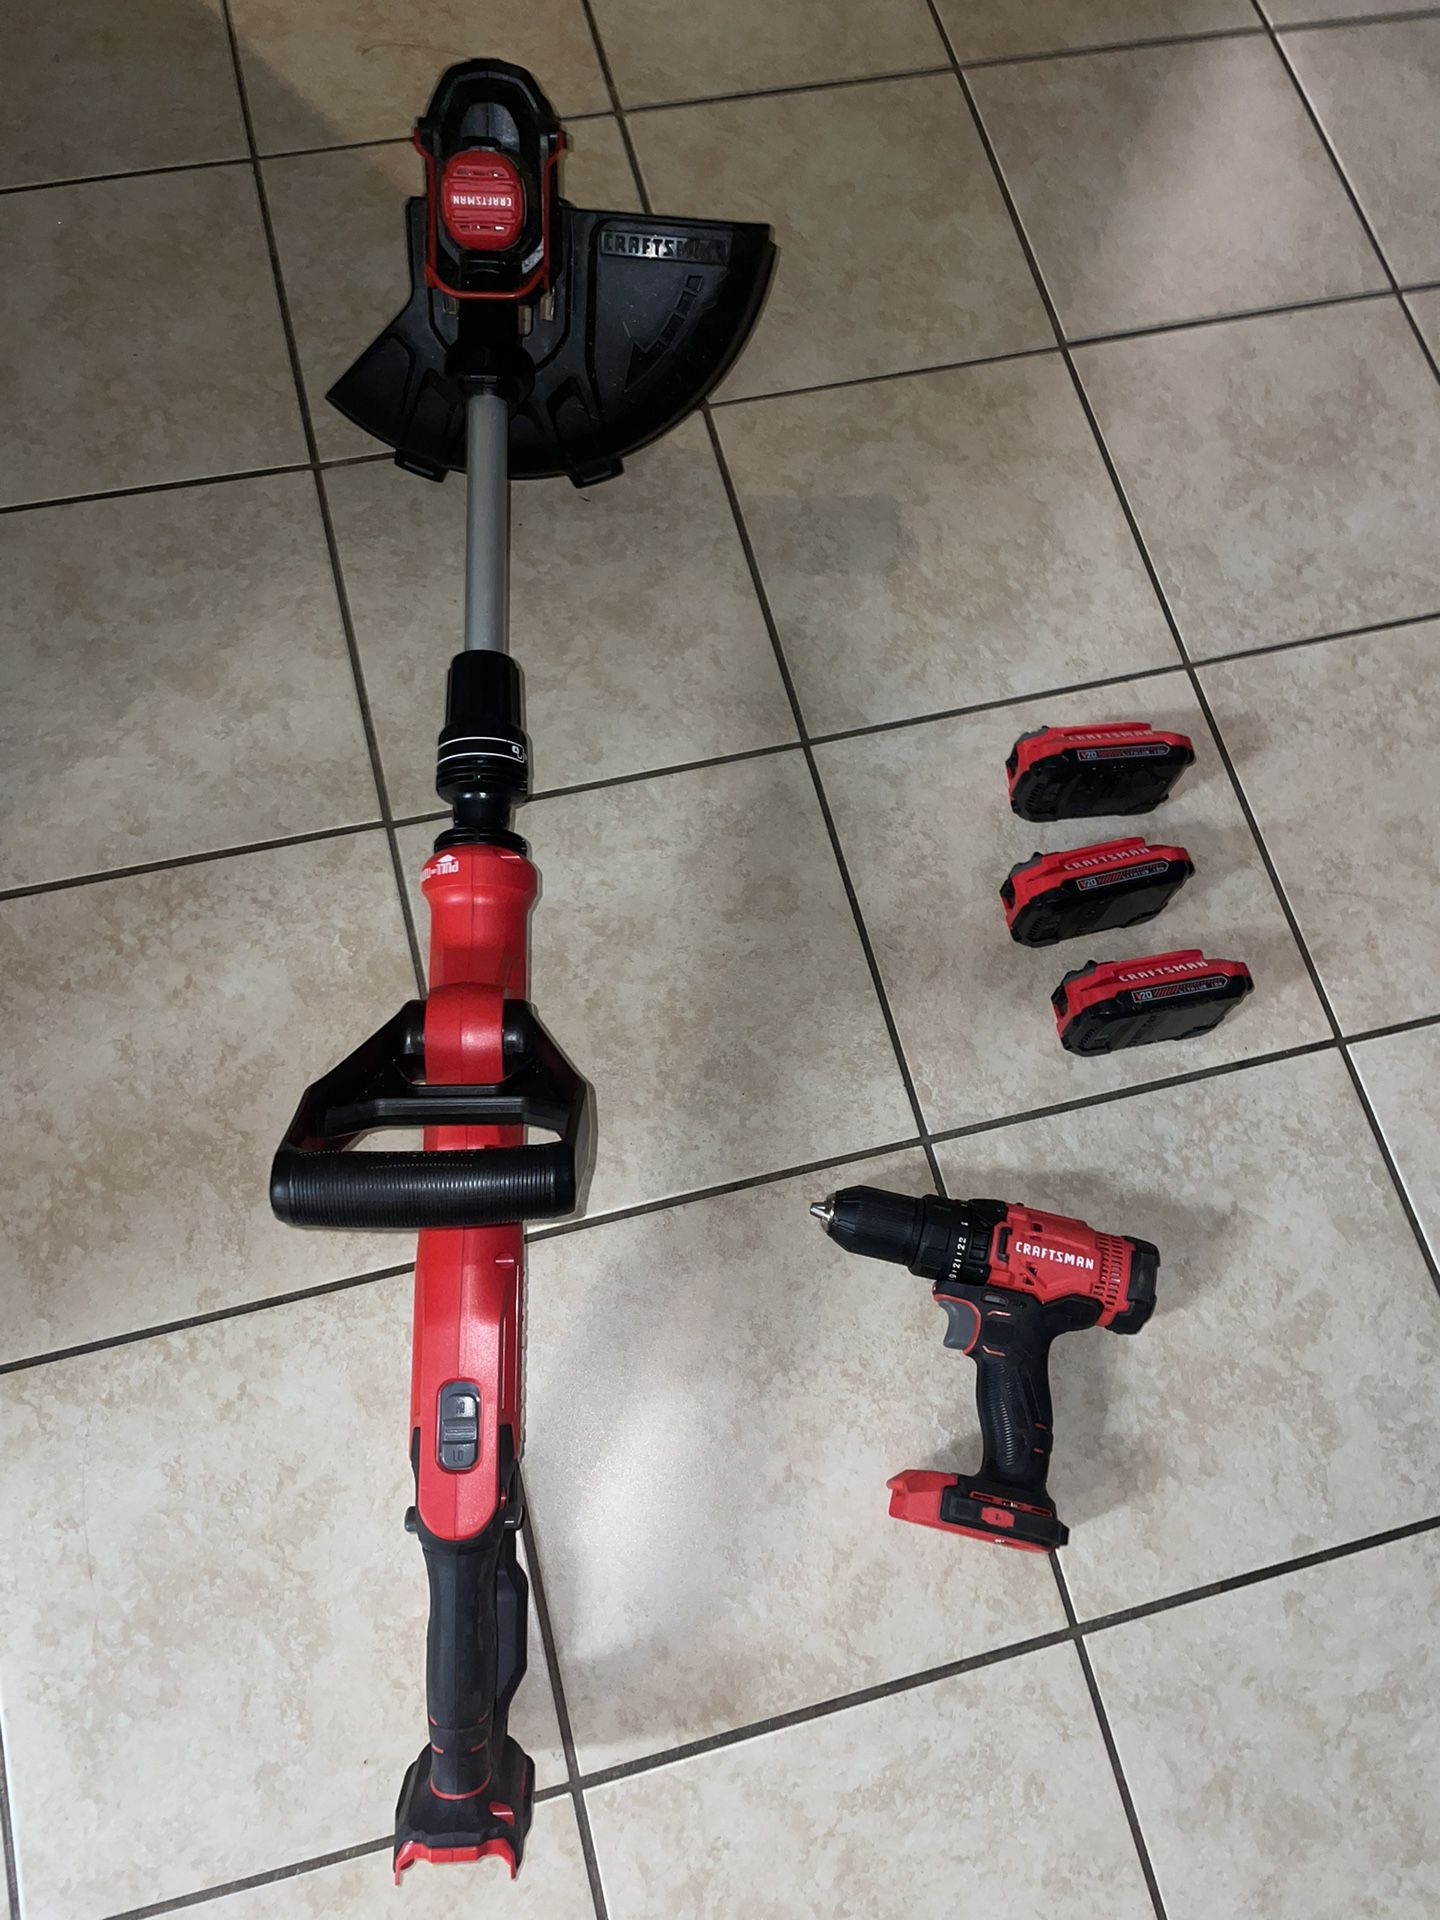 CRAFTSMAN  Drill Hammer And Weed Eater Set